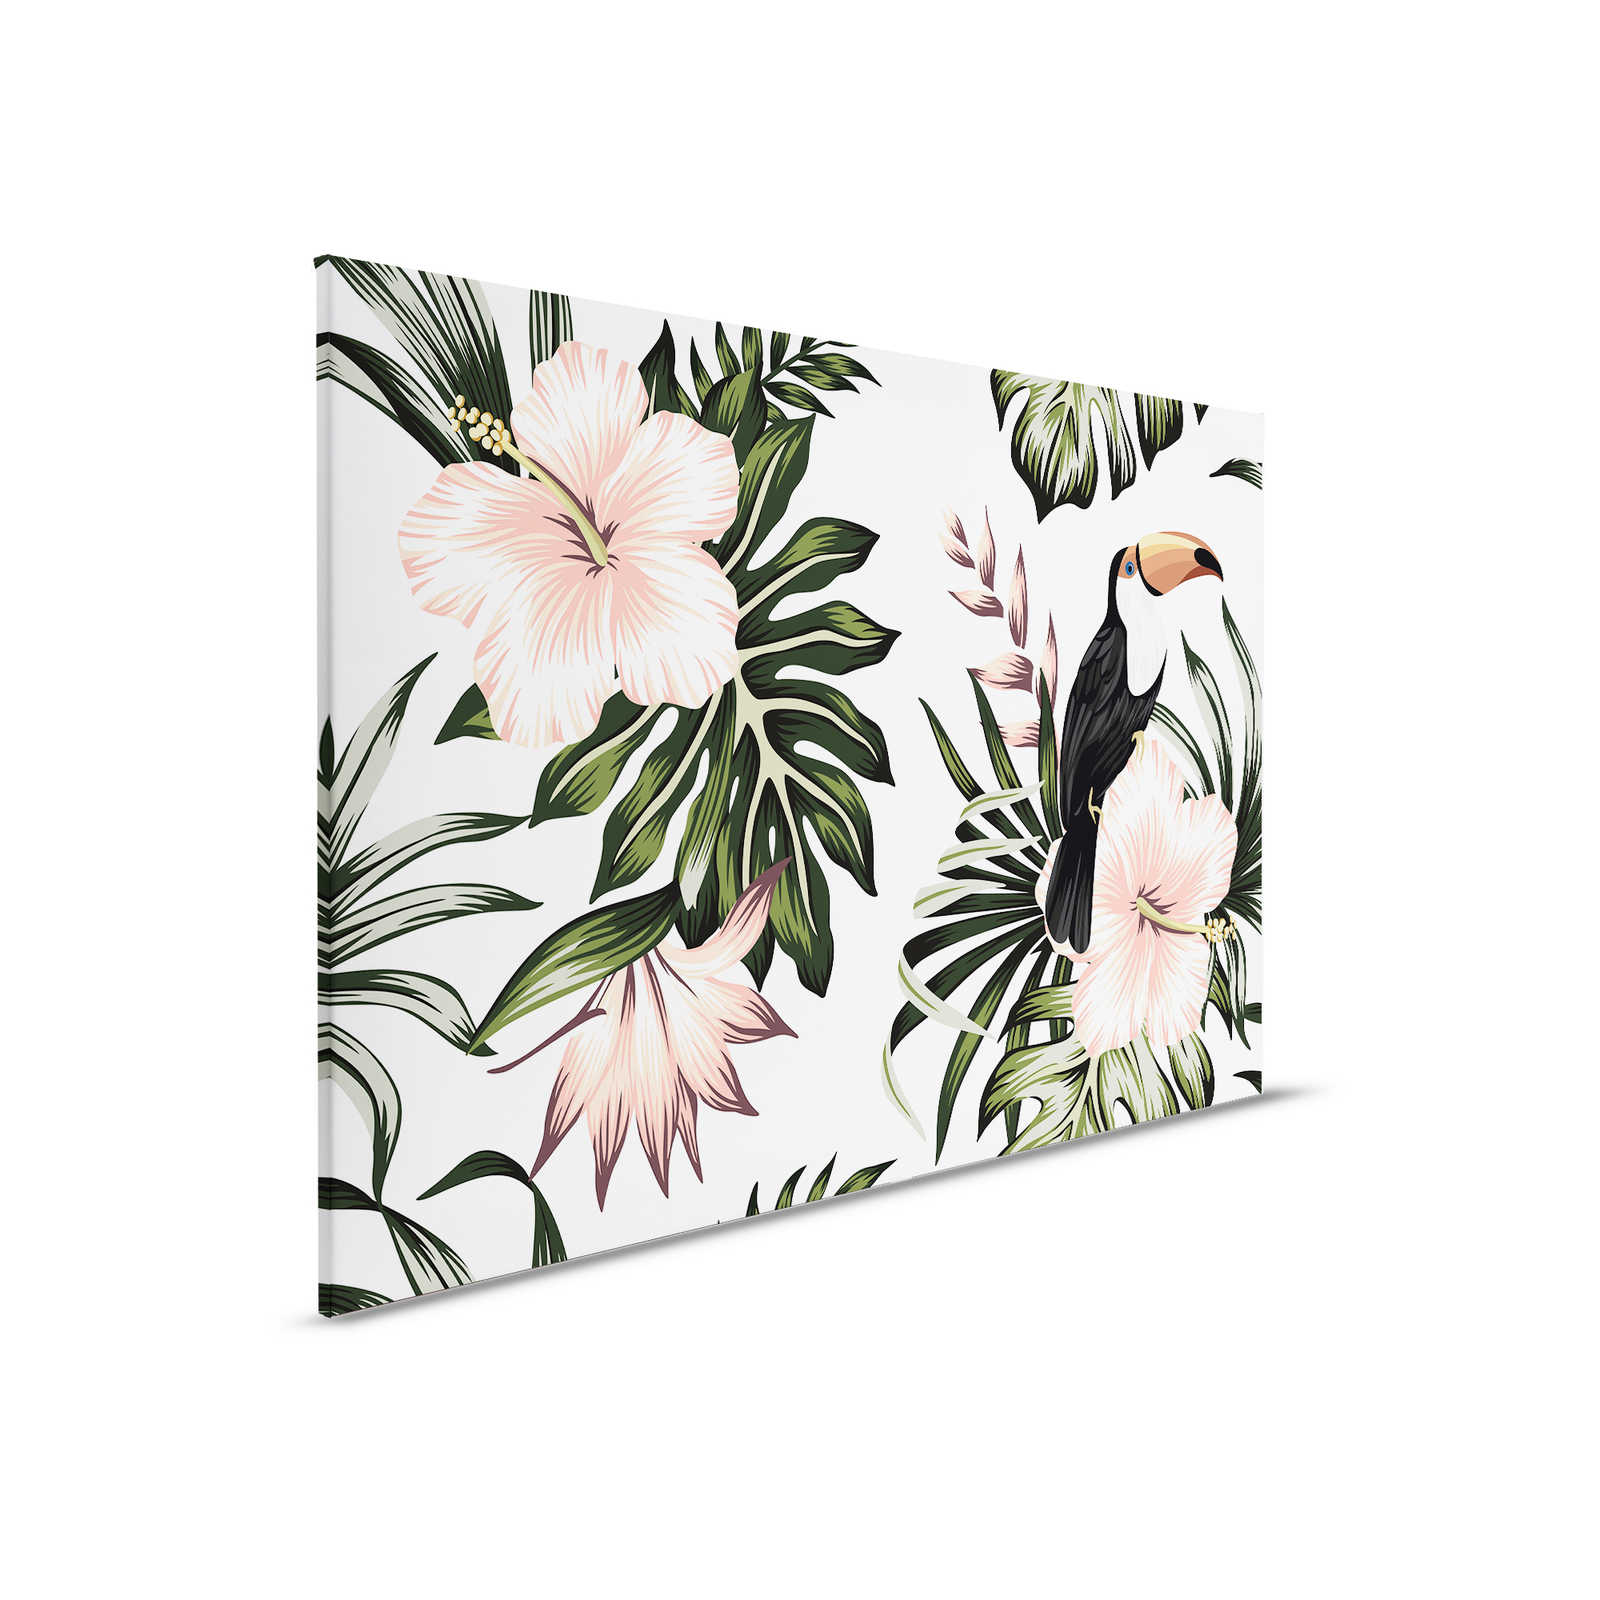 Canvas with Jungle Plants and Pelican | White, Pink, Green - 0.90 m x 0.60 m
